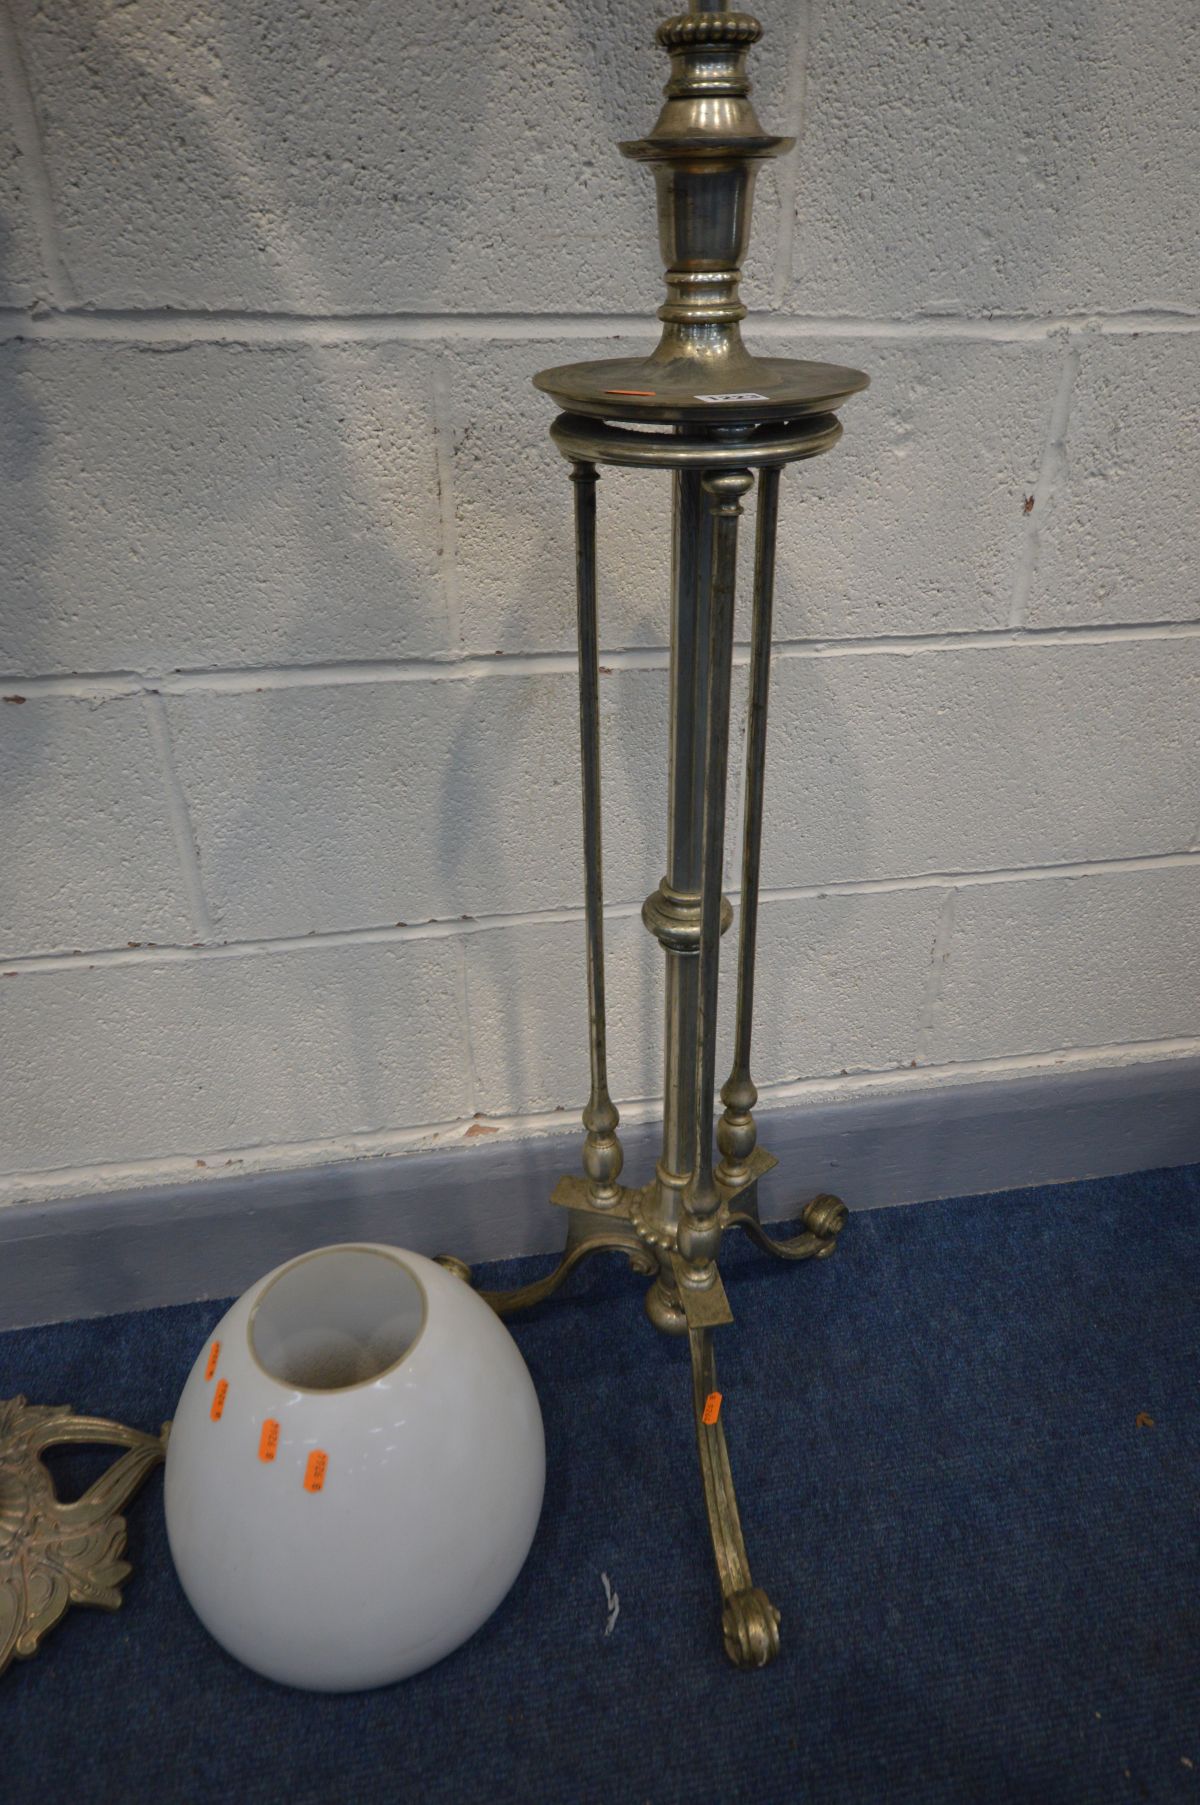 A TELESCOPIC OIL LAMP, white glass shade, brass reservoir, min height 133cm x max height 198cm, with - Image 3 of 4